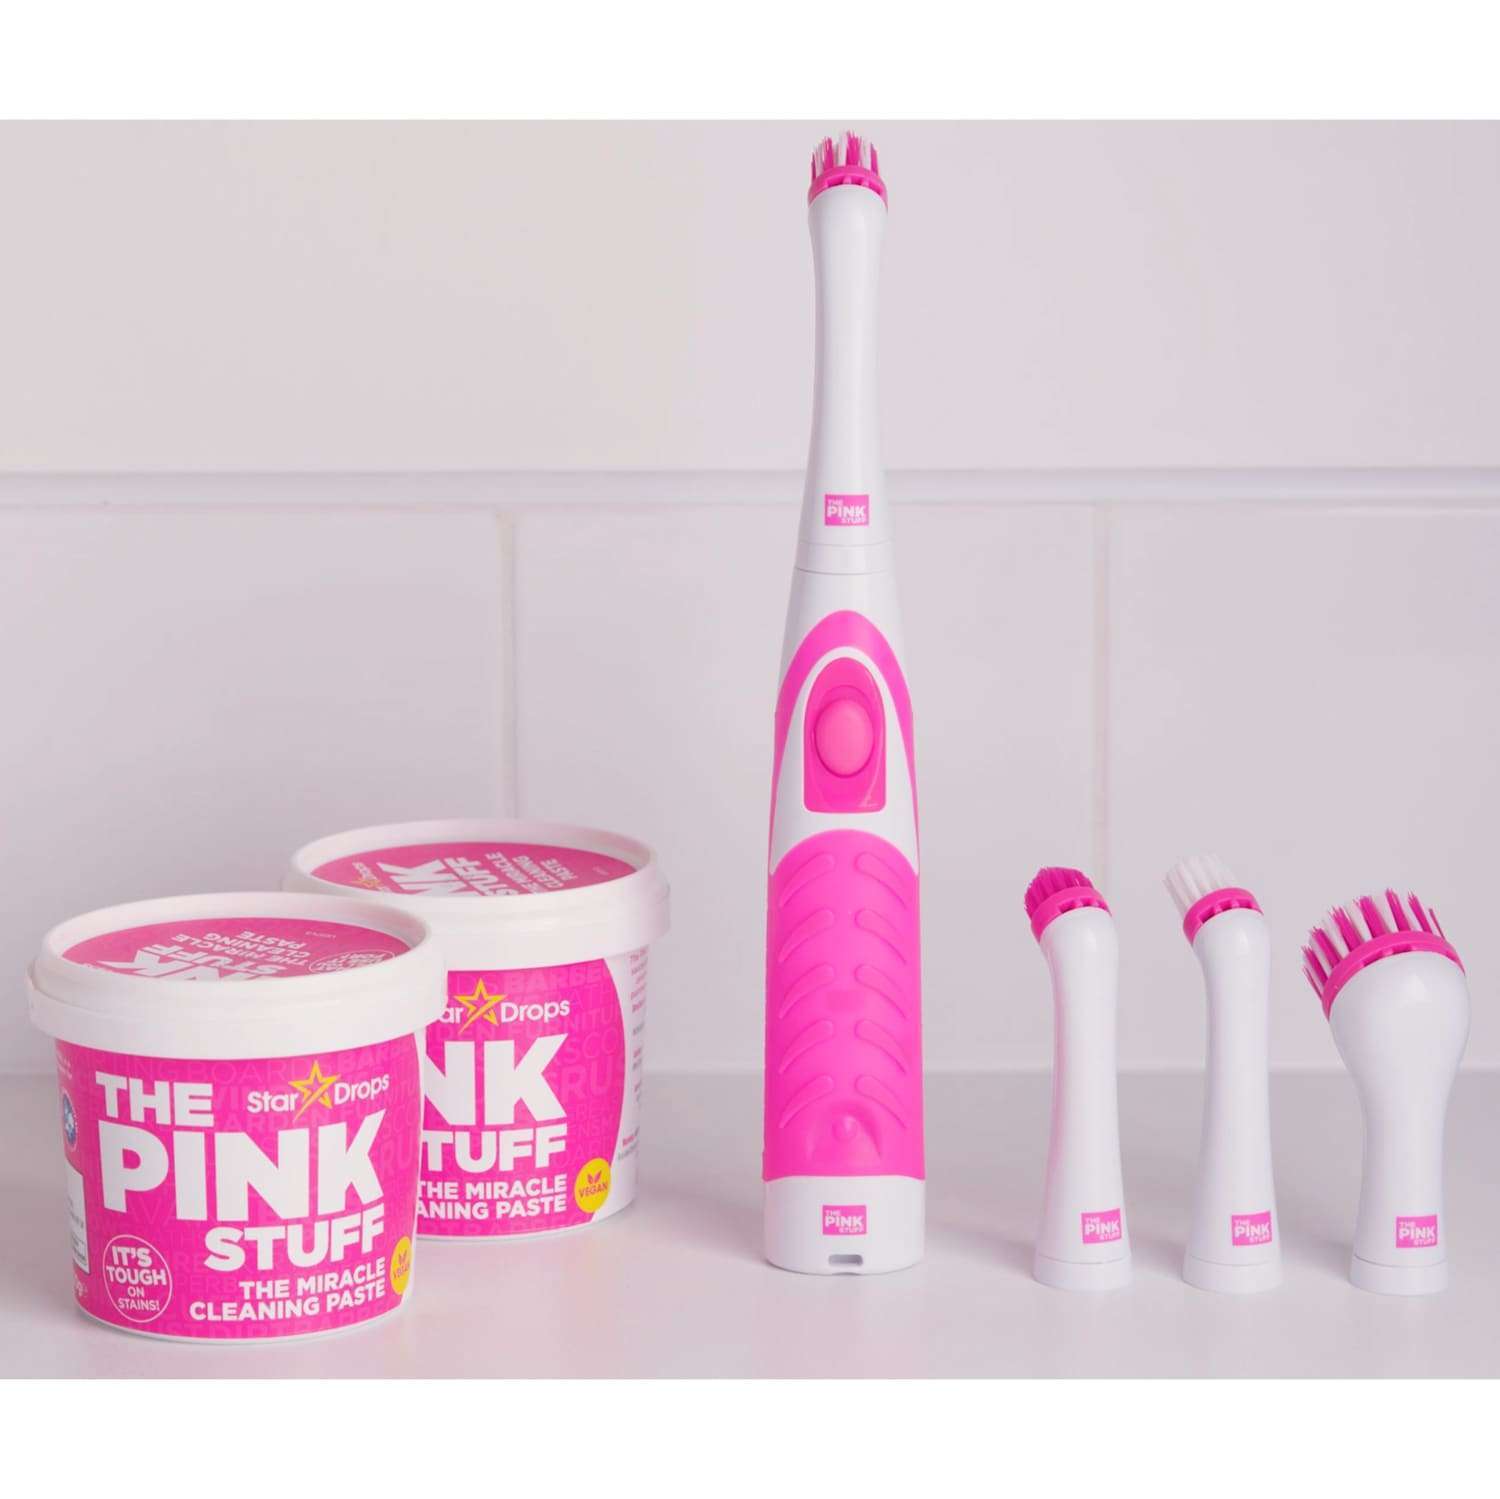 The Pink Stuff The Miracle Scrubber Kit (Paste 500g x 2